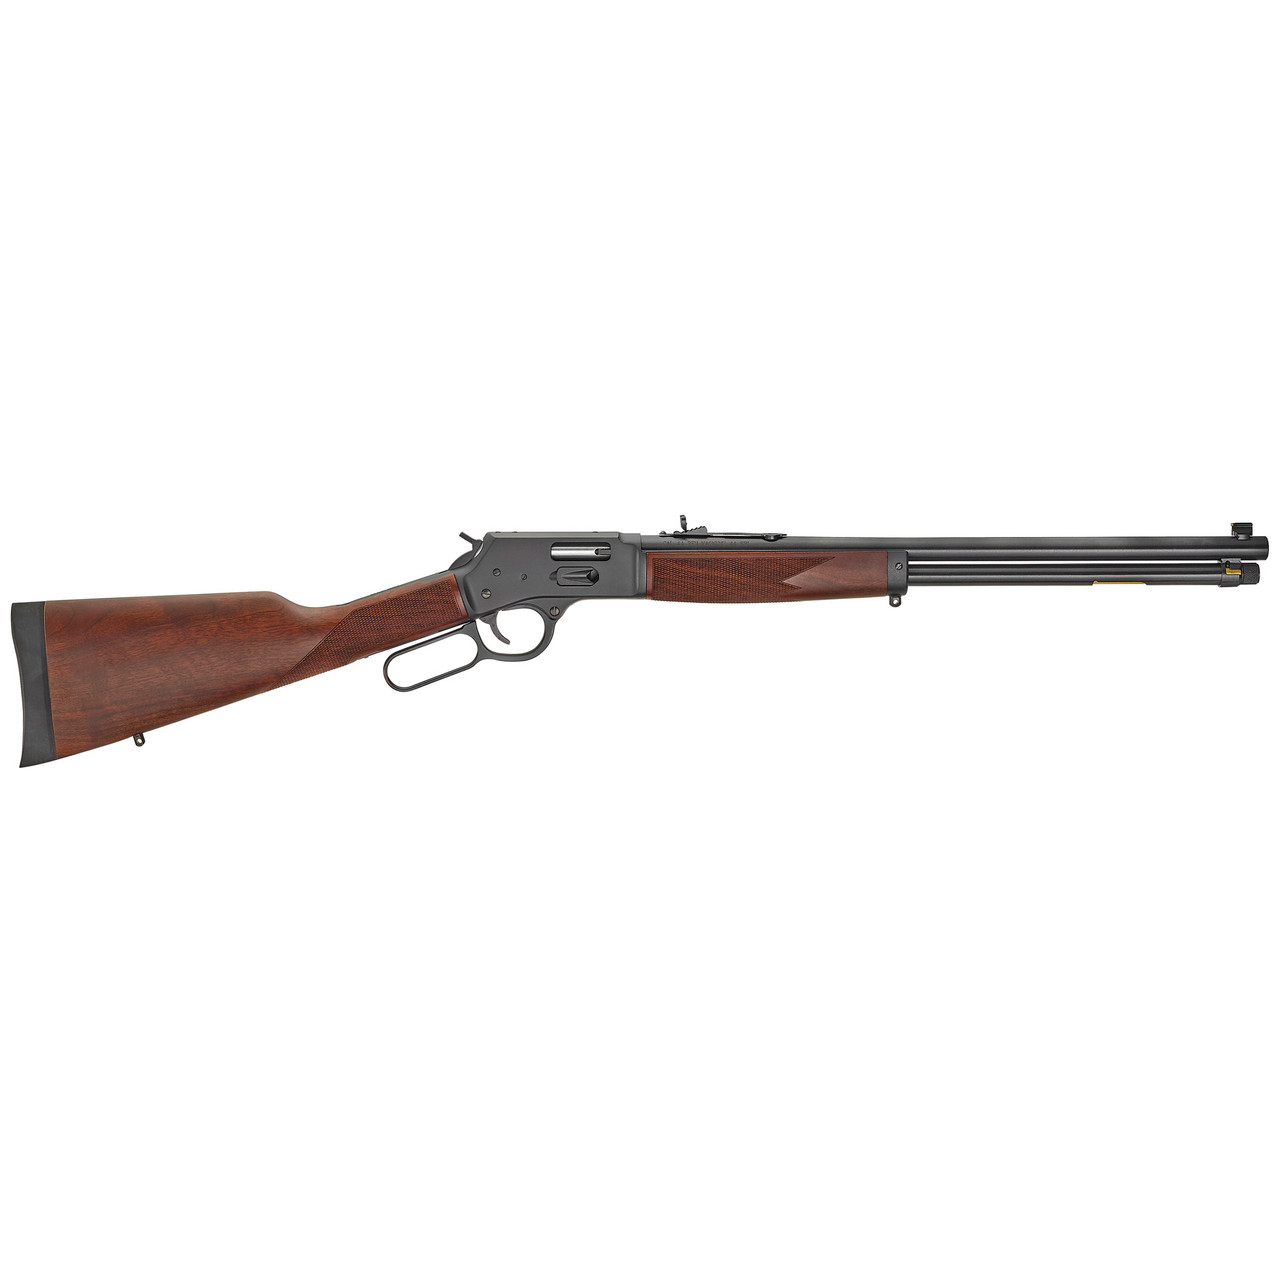 Image of HENRY REPEATING ARMS BIG BOY SIDE GATE .357 MAGNUM 20" ROUND BARREL 10-ROUNDS WALNUT